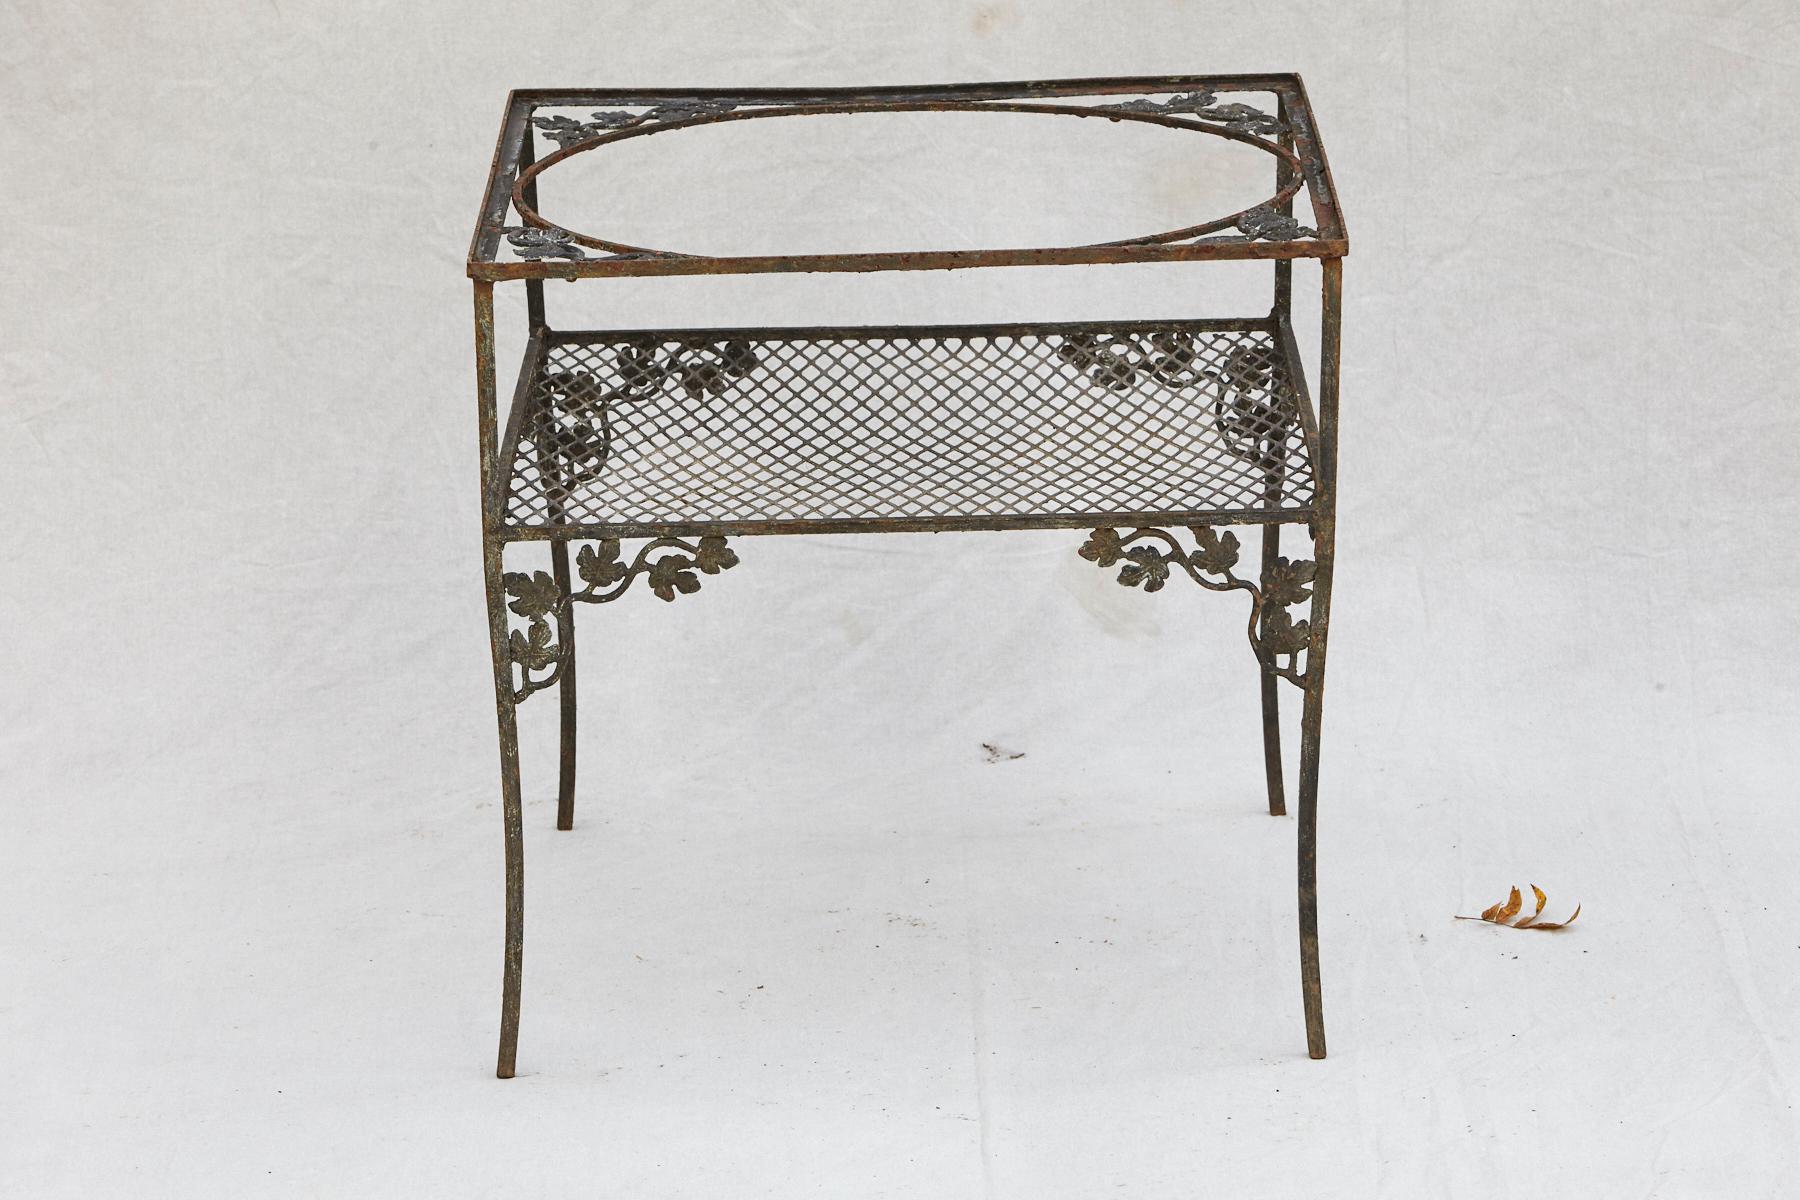 Grouping of Woodard Wrought Iron Garden Corner Chairs with Matching Side Table 1